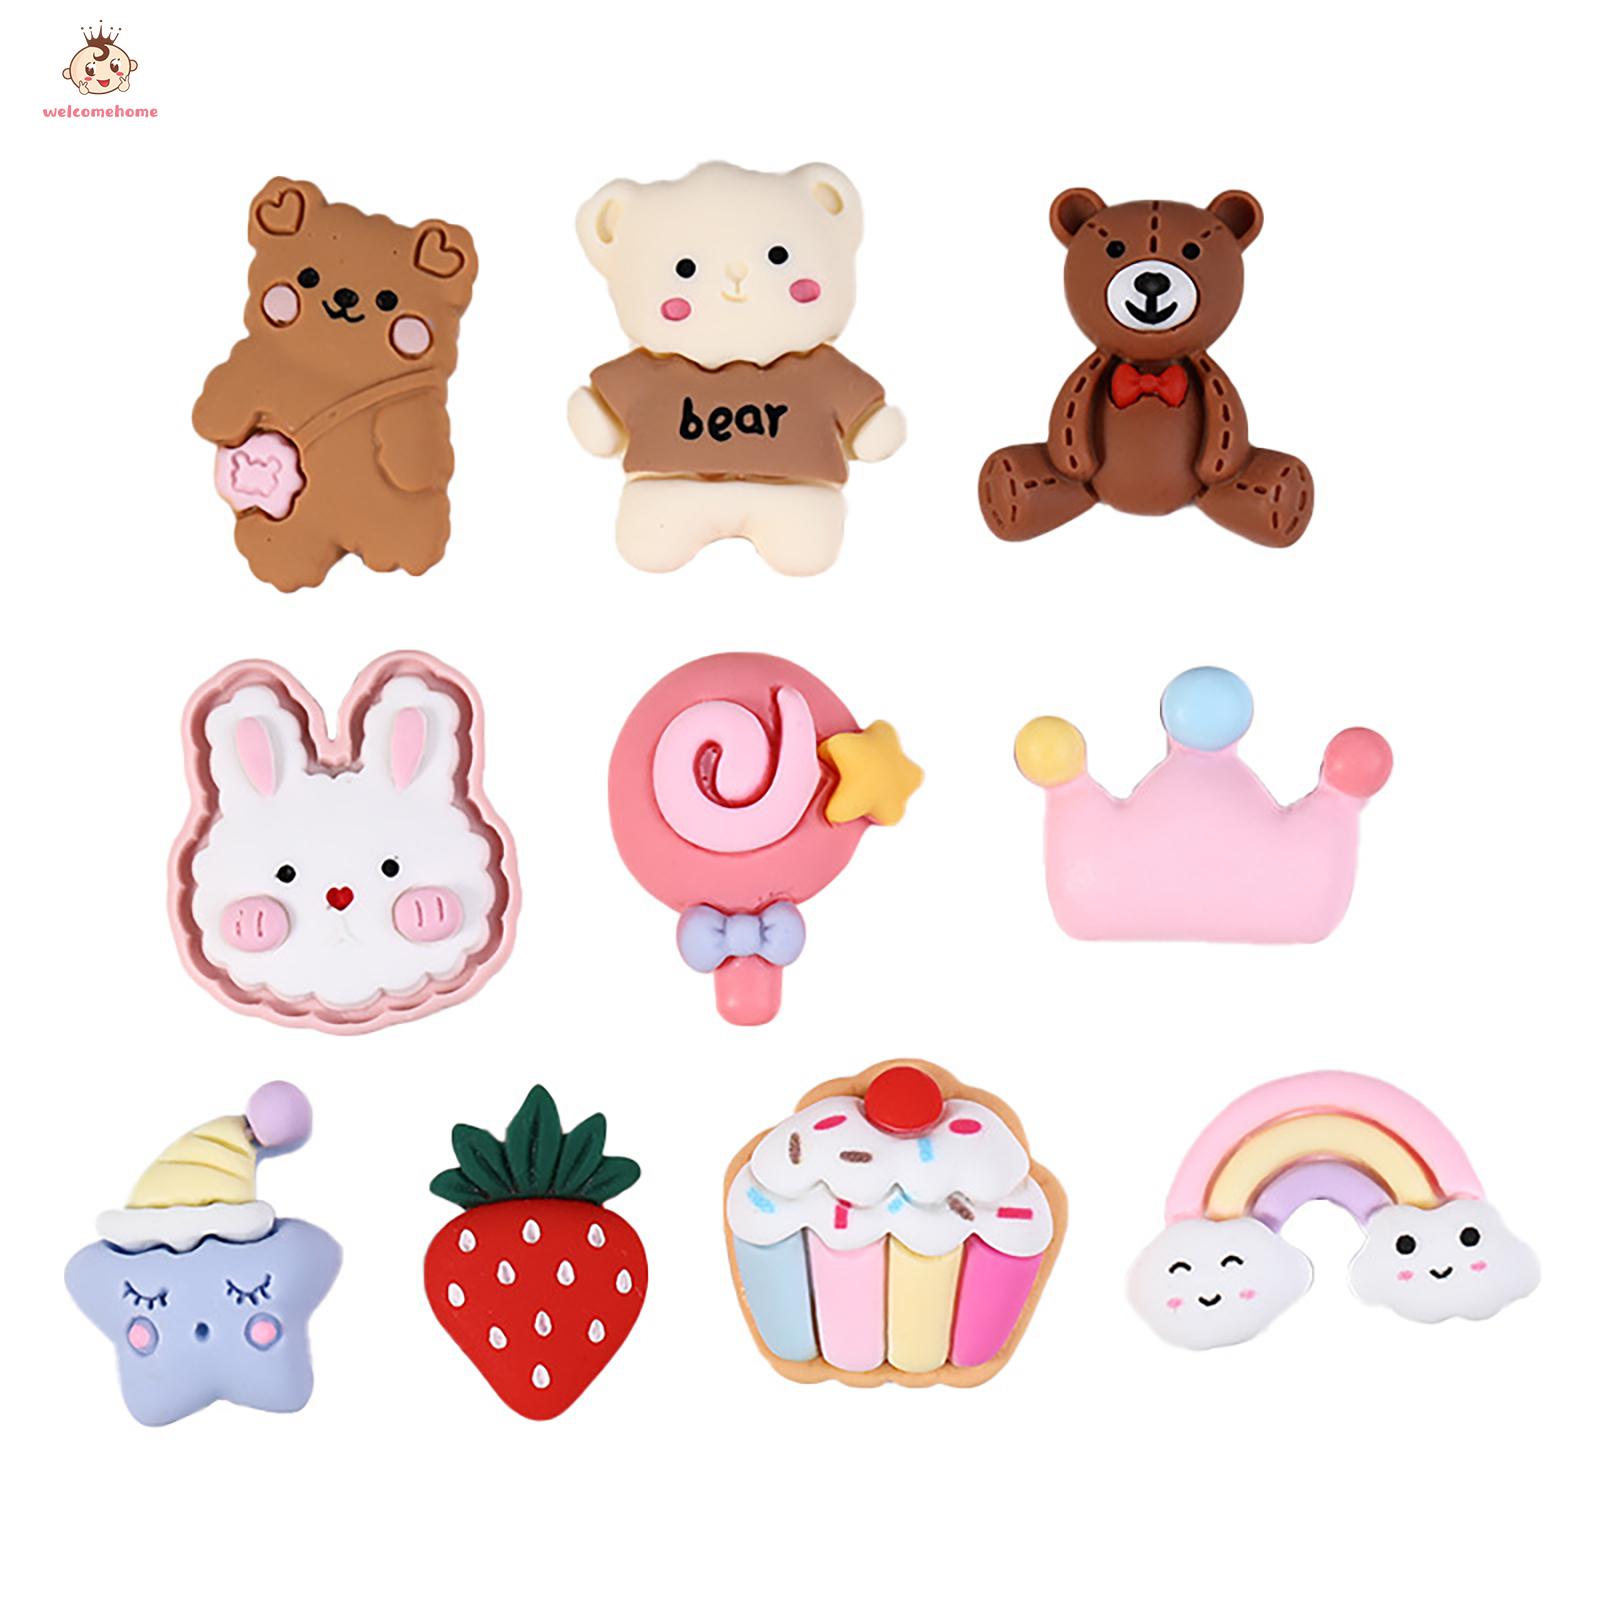 1 Set Color Number Labels with Numbers DMC 447 DMC Diamond Painting Number  Sticker 26 Letters 1-100 Heart-shaped for Adults Kids